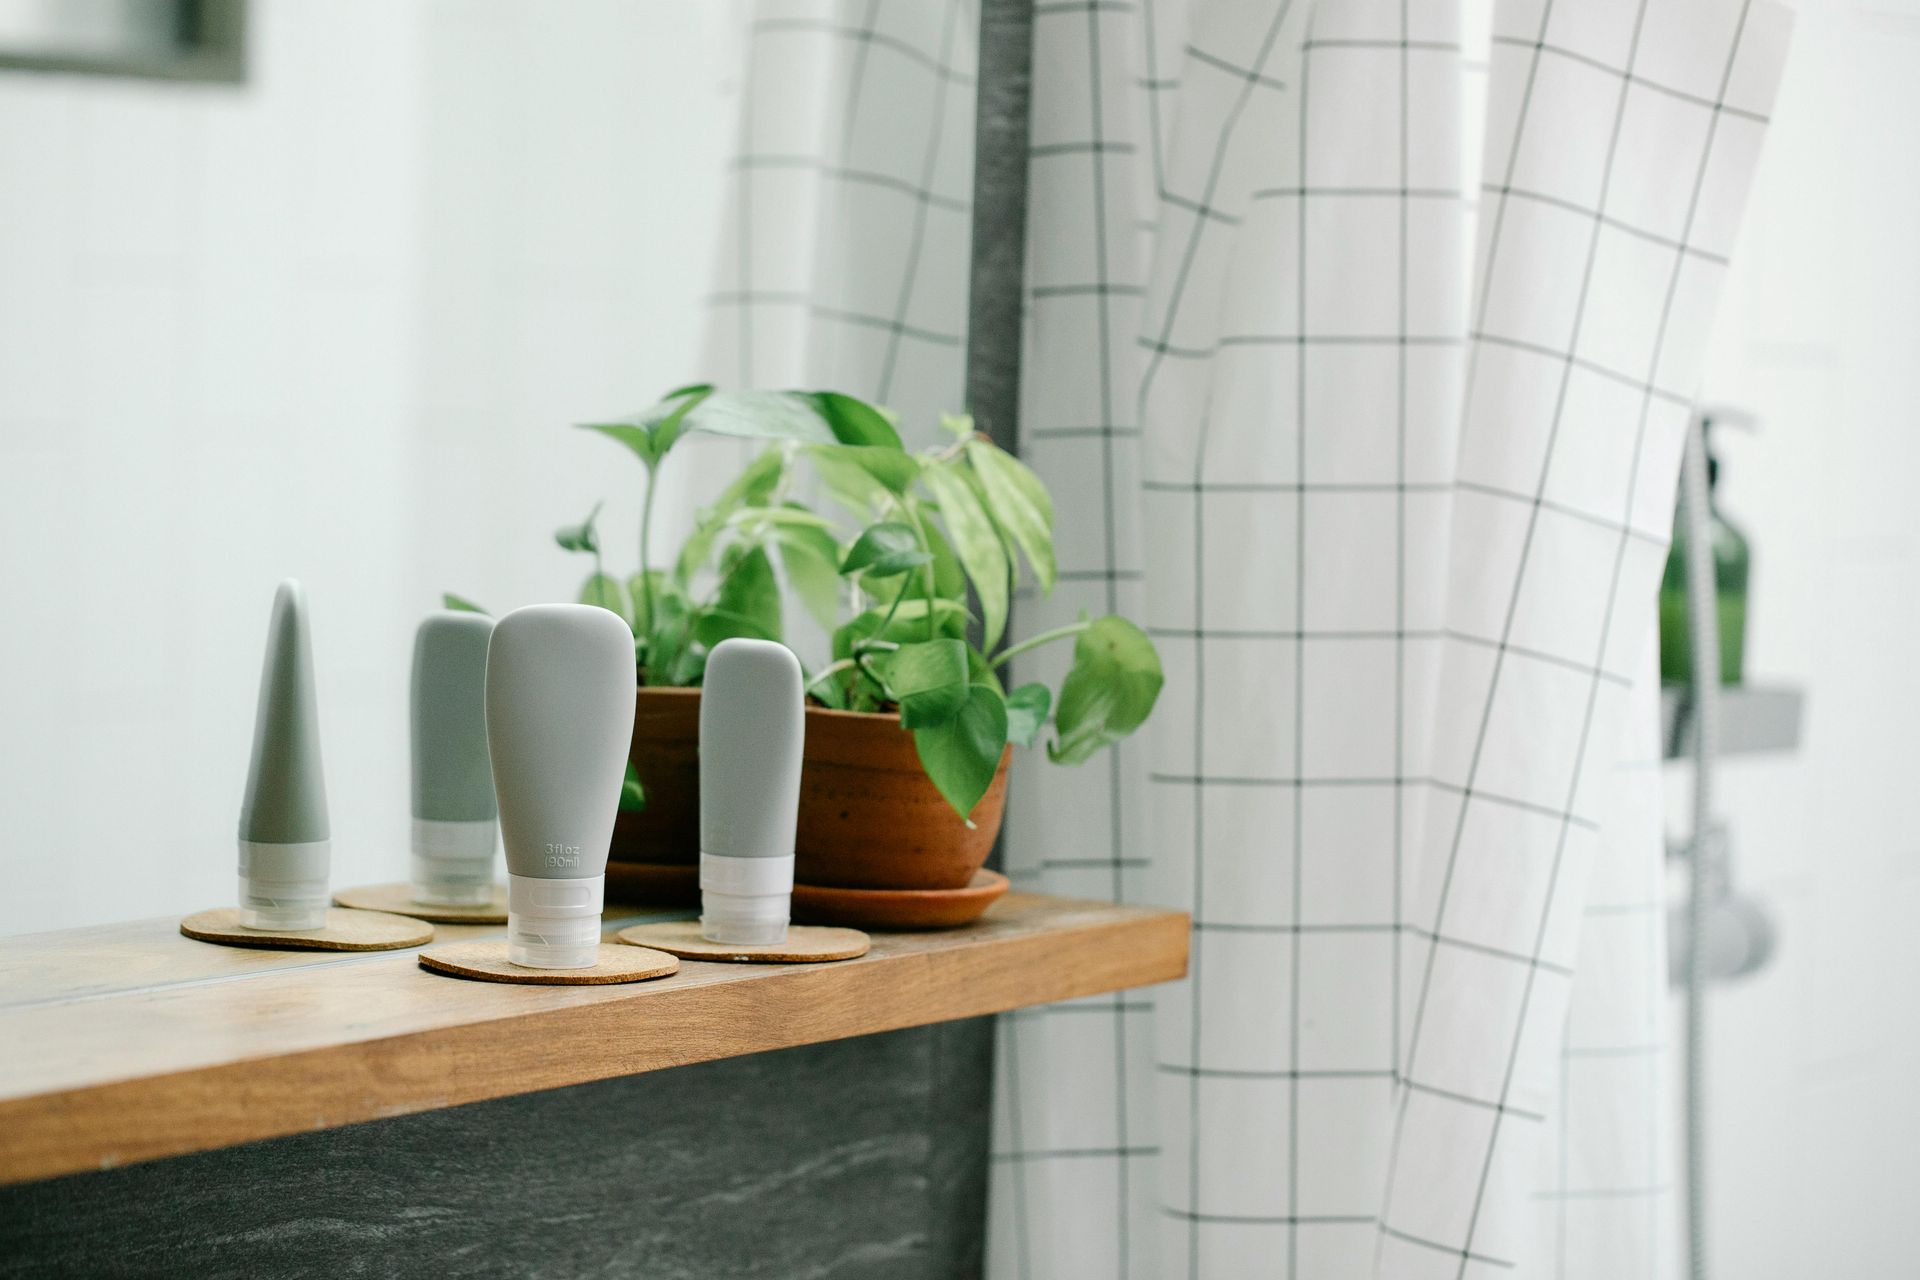 A bathroom with a plant and bottles on a shelf.